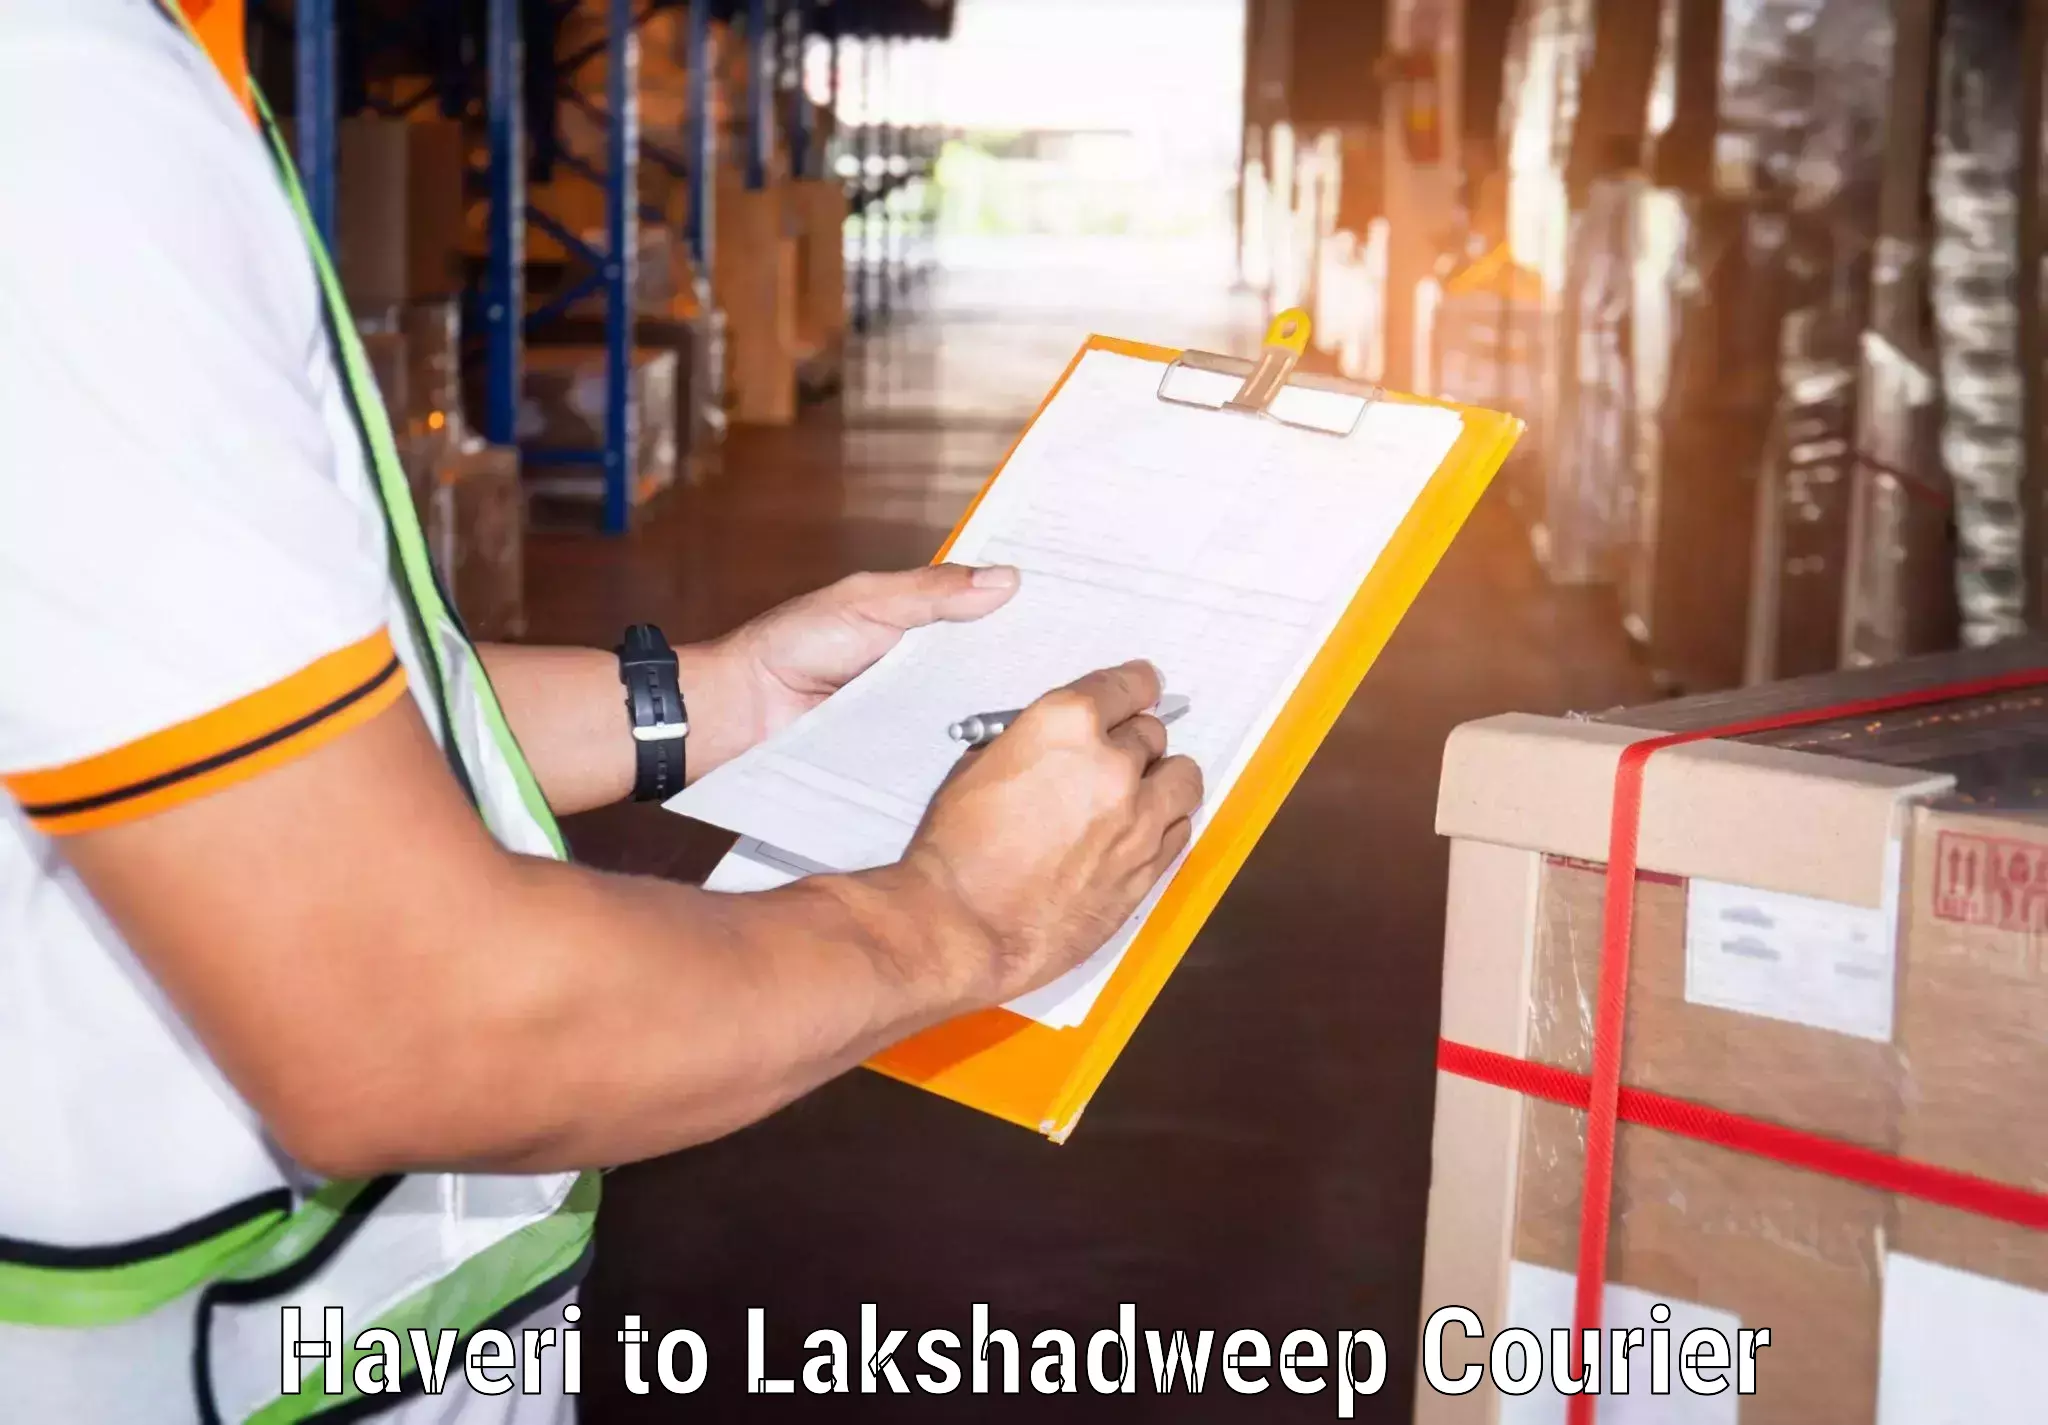 Next-generation courier services Haveri to Lakshadweep